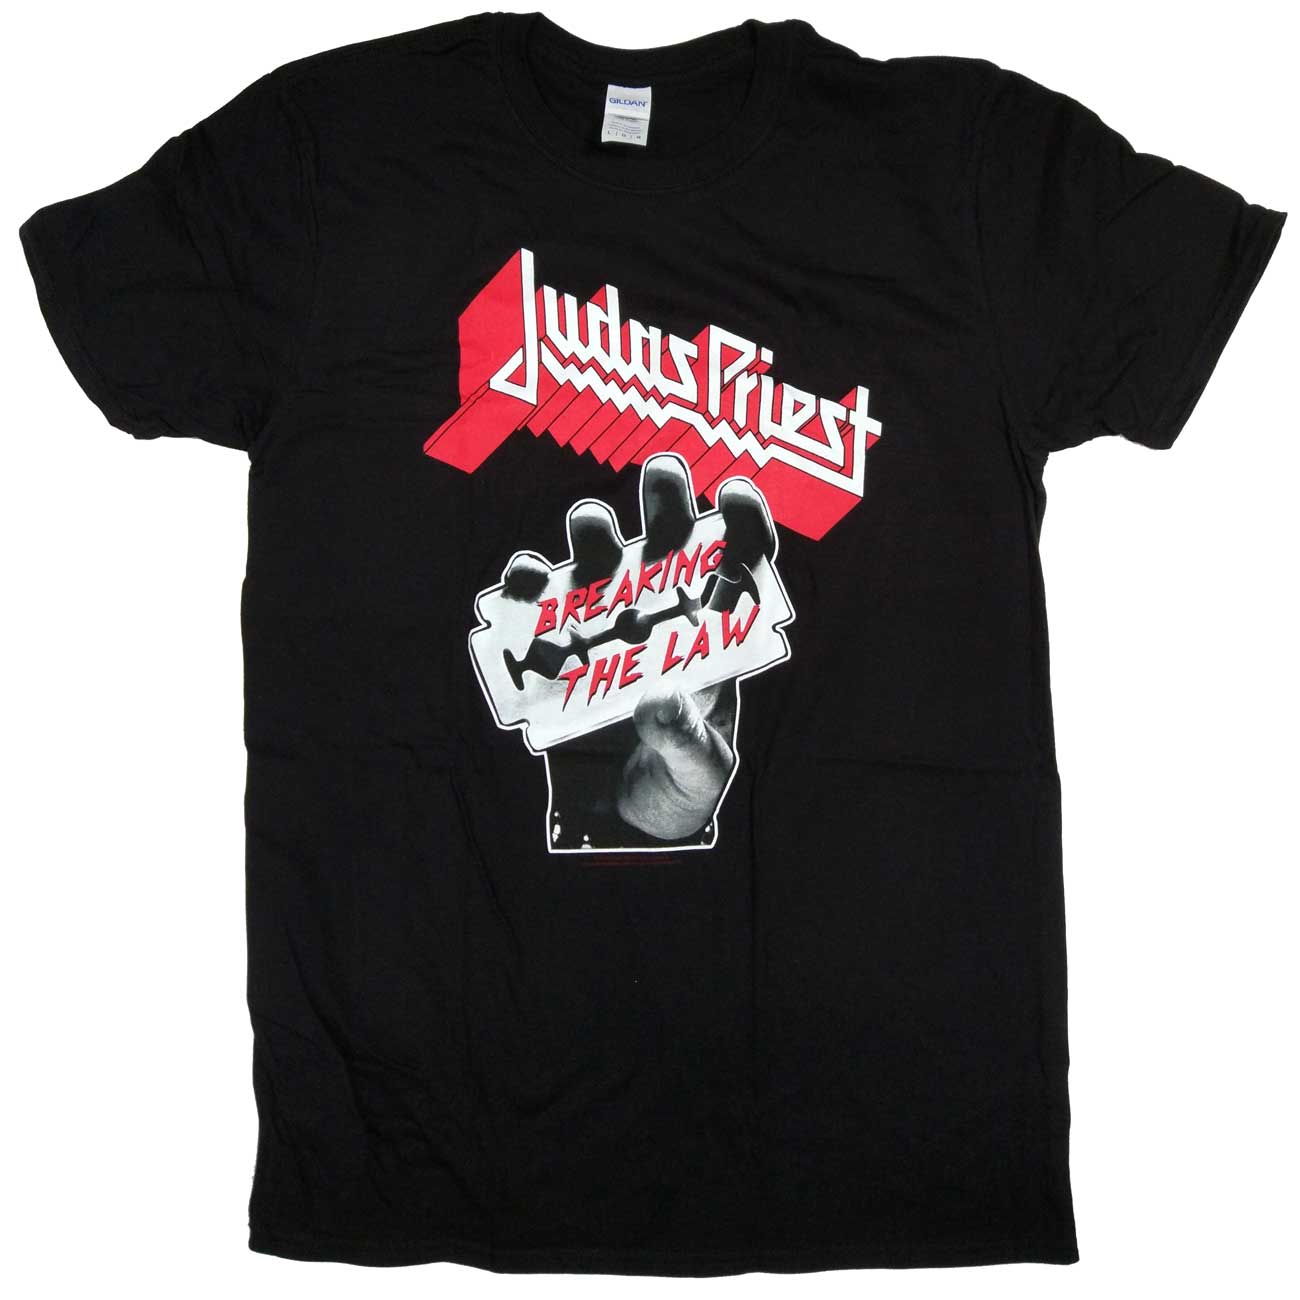 Judas Priest T Shirt - Breaking The Law Retro Print 100% Official Licensed